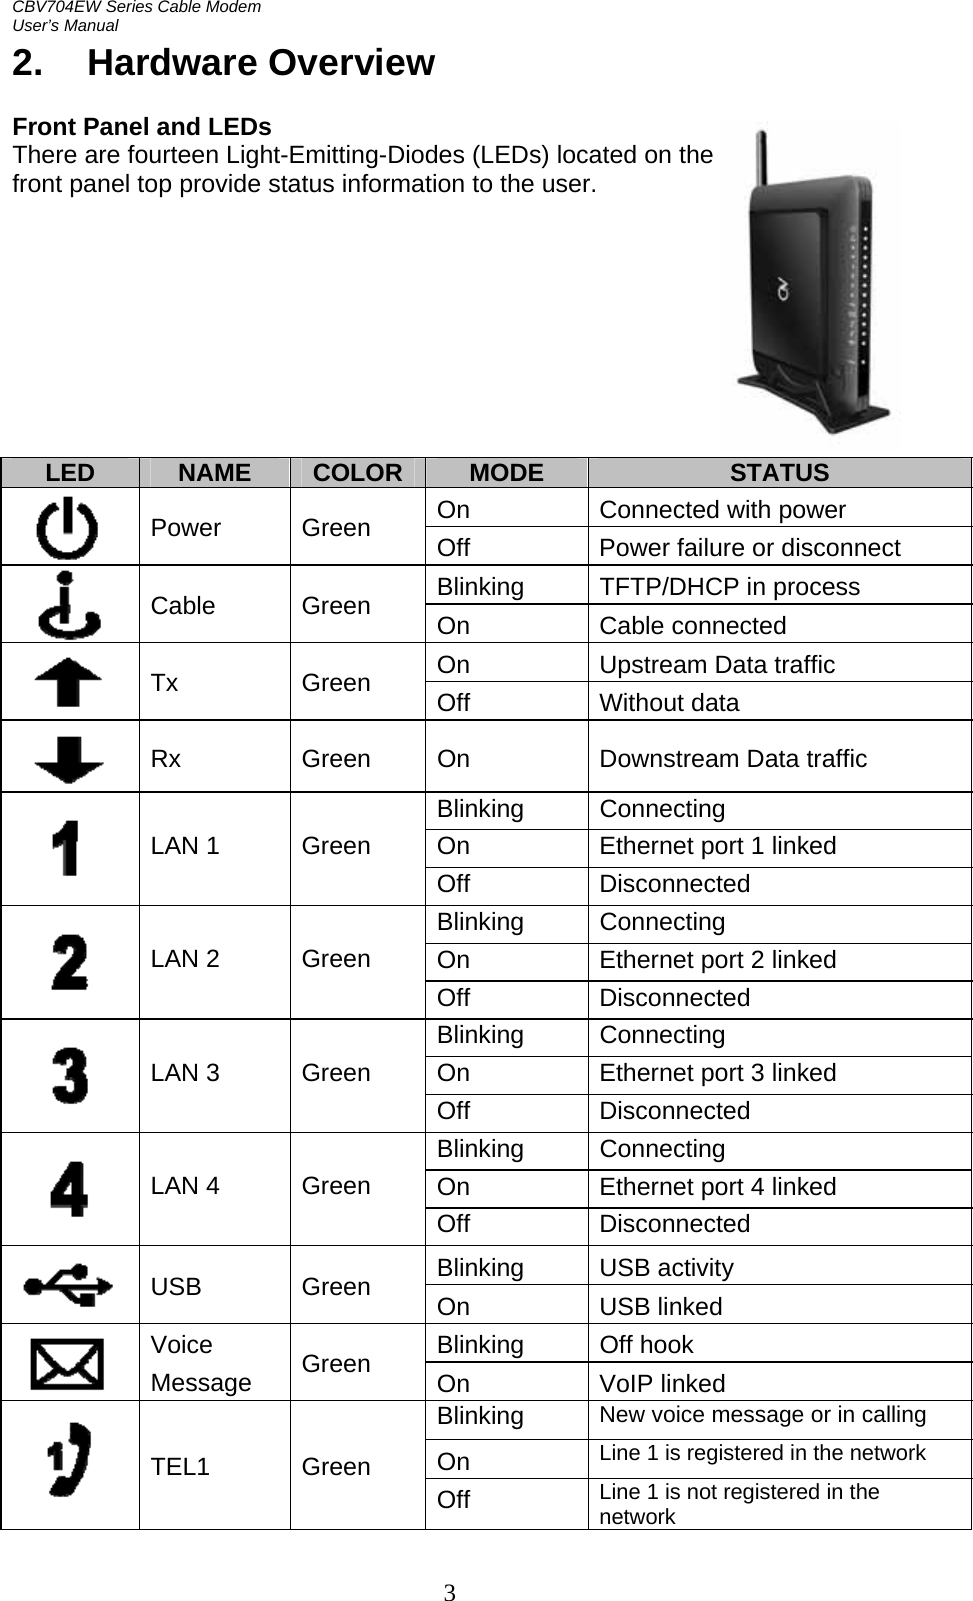 CBV704EW Series Cable Modem  User’s Manual   32. Hardware Overview  Front Panel and LEDs There are fourteen Light-Emitting-Diodes (LEDs) located on the  front panel top provide status information to the user.          LED  NAME  COLOR  MODE  STATUS  On Connected with power  Power Green Off  Power failure or disconnect   Blinking  TFTP/DHCP in process  Cable Green On Cable connected  On Upstream Data traffic  Tx Green Off Without data  Rx  Green  On  Downstream Data traffic Blinking Connecting  On  Ethernet port 1 linked  LAN 1  Green Off   Disconnected Blinking Connecting  On  Ethernet port 2 linked  LAN 2  Green Off   Disconnected Blinking Connecting  On  Ethernet port 3 linked  LAN 3  Green Off   Disconnected Blinking Connecting  On  Ethernet port 4 linked  LAN 4  Green Off   Disconnected Blinking USB activity   USB Green On USB linked  Blinking Off hook  Voice Message  Green  On   VoIP linked  Blinking New voice message or in calling On  Line 1 is registered in the network  TEL1 Green Off  Line 1 is not registered in the network 